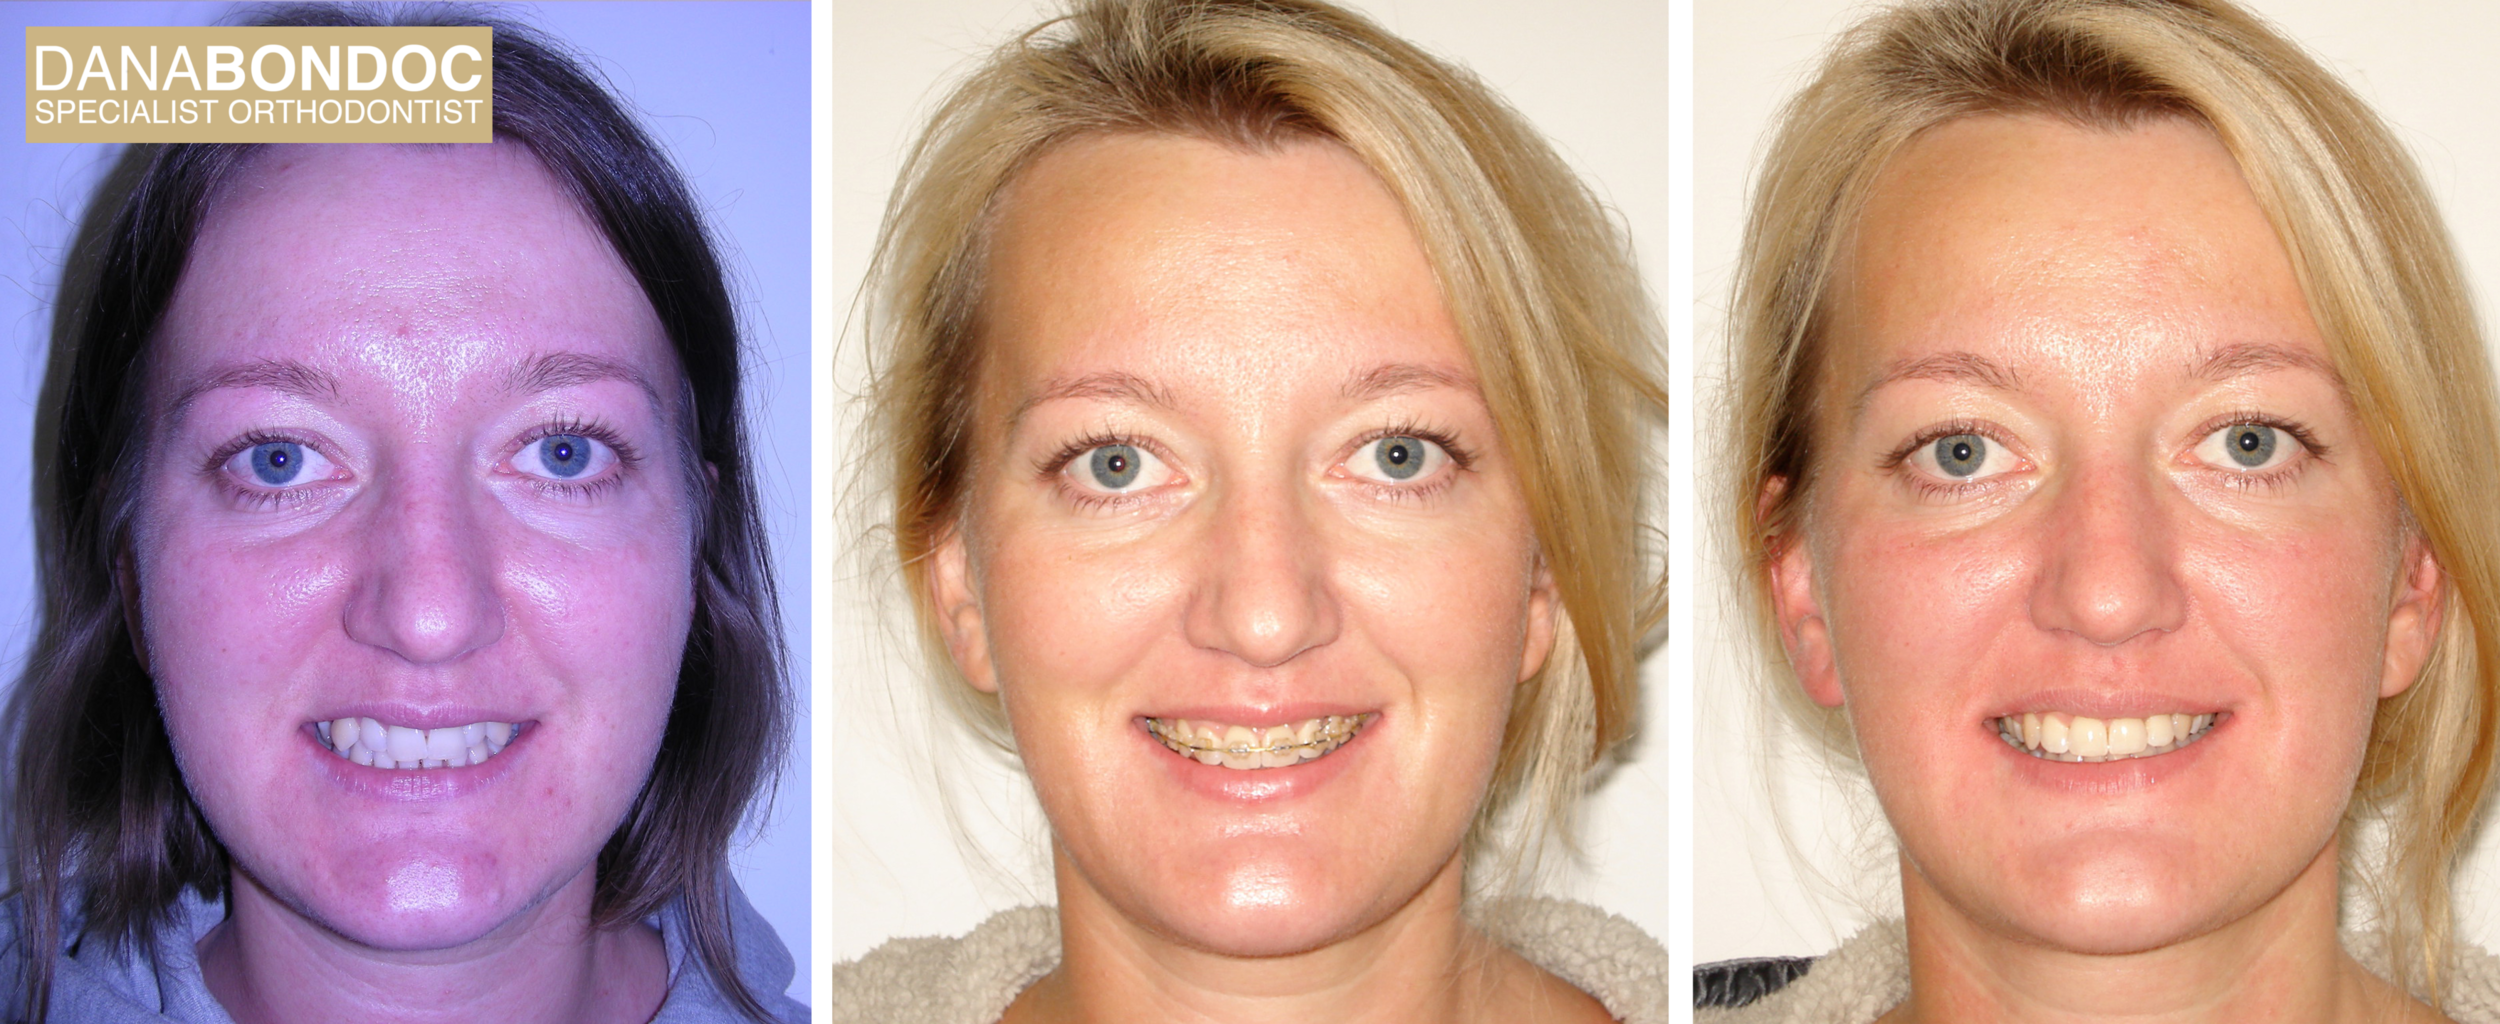 Before treatment, with clear braces on, after treatment photos of female adult patient.